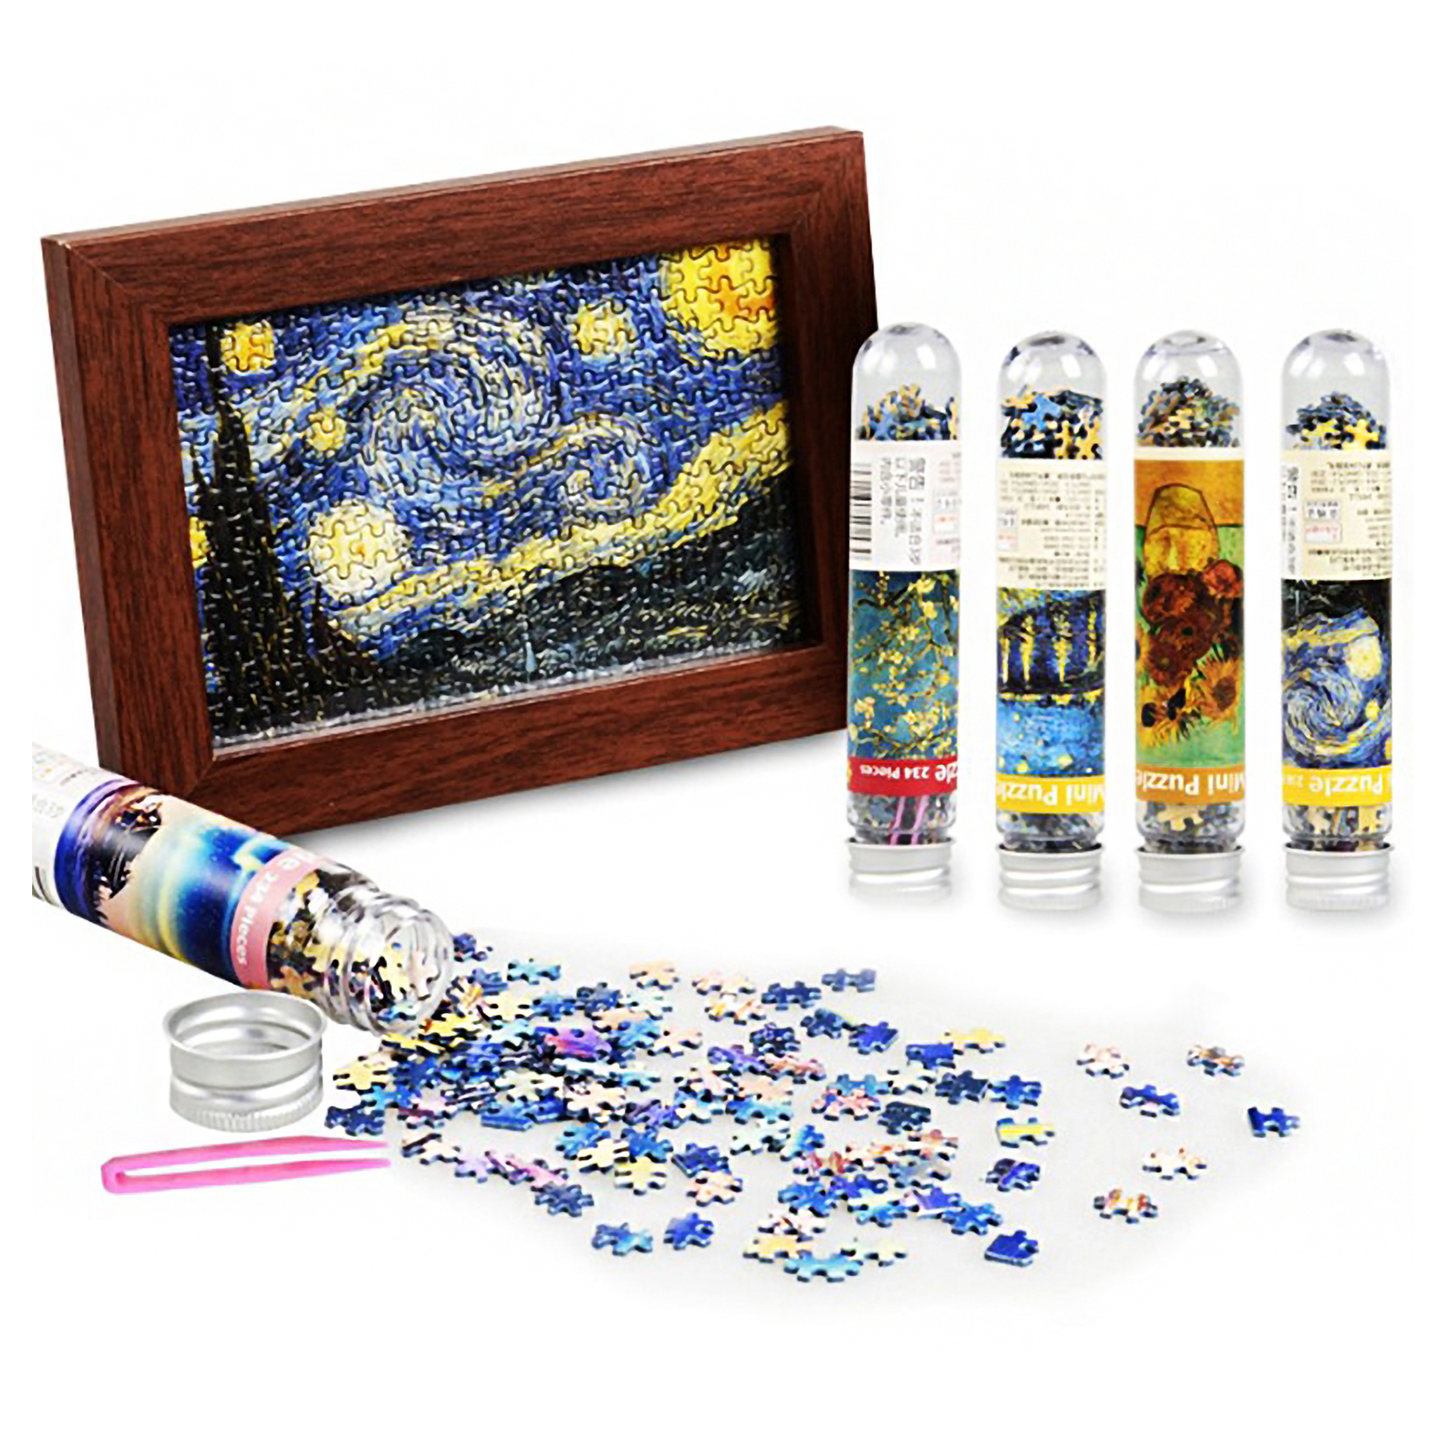 Starry Night Test Tube Puzzle - Block Center 